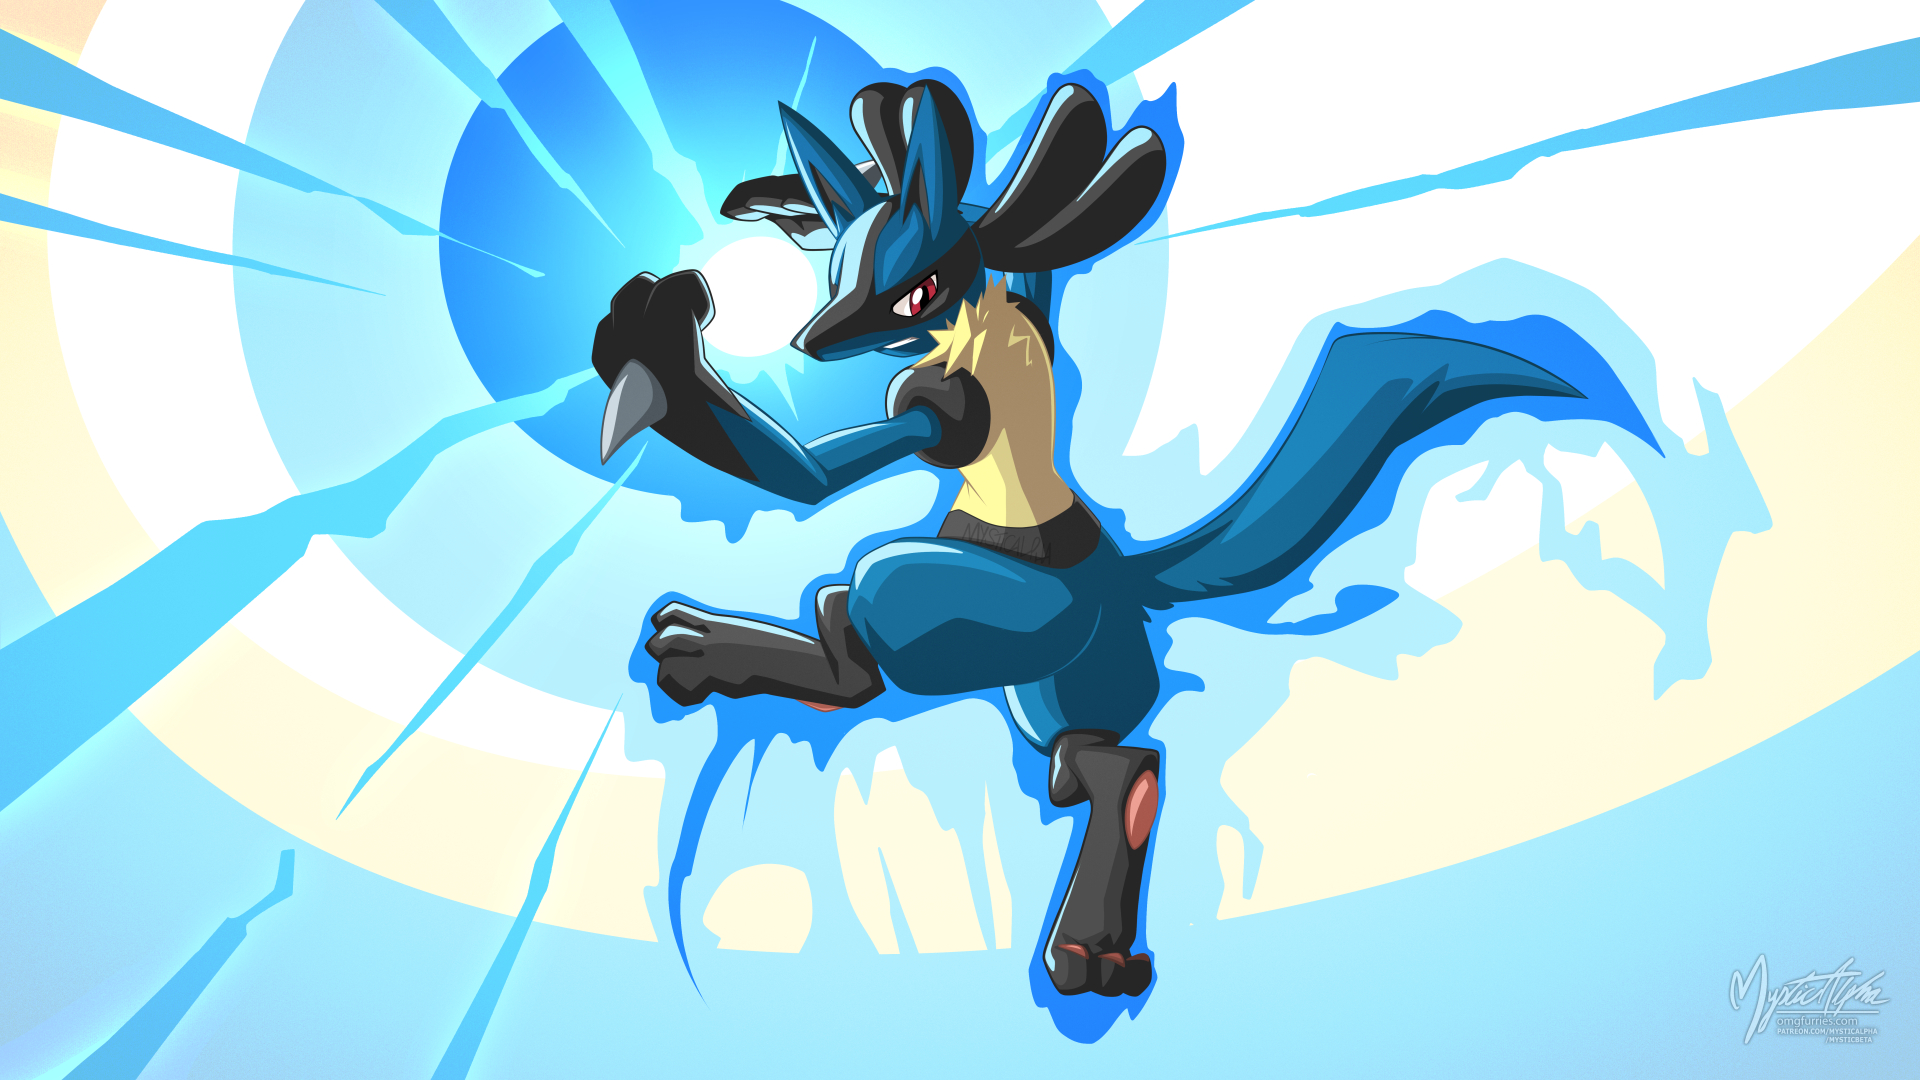 The Lucario Wallpaper by FRUITYNITE on DeviantArt